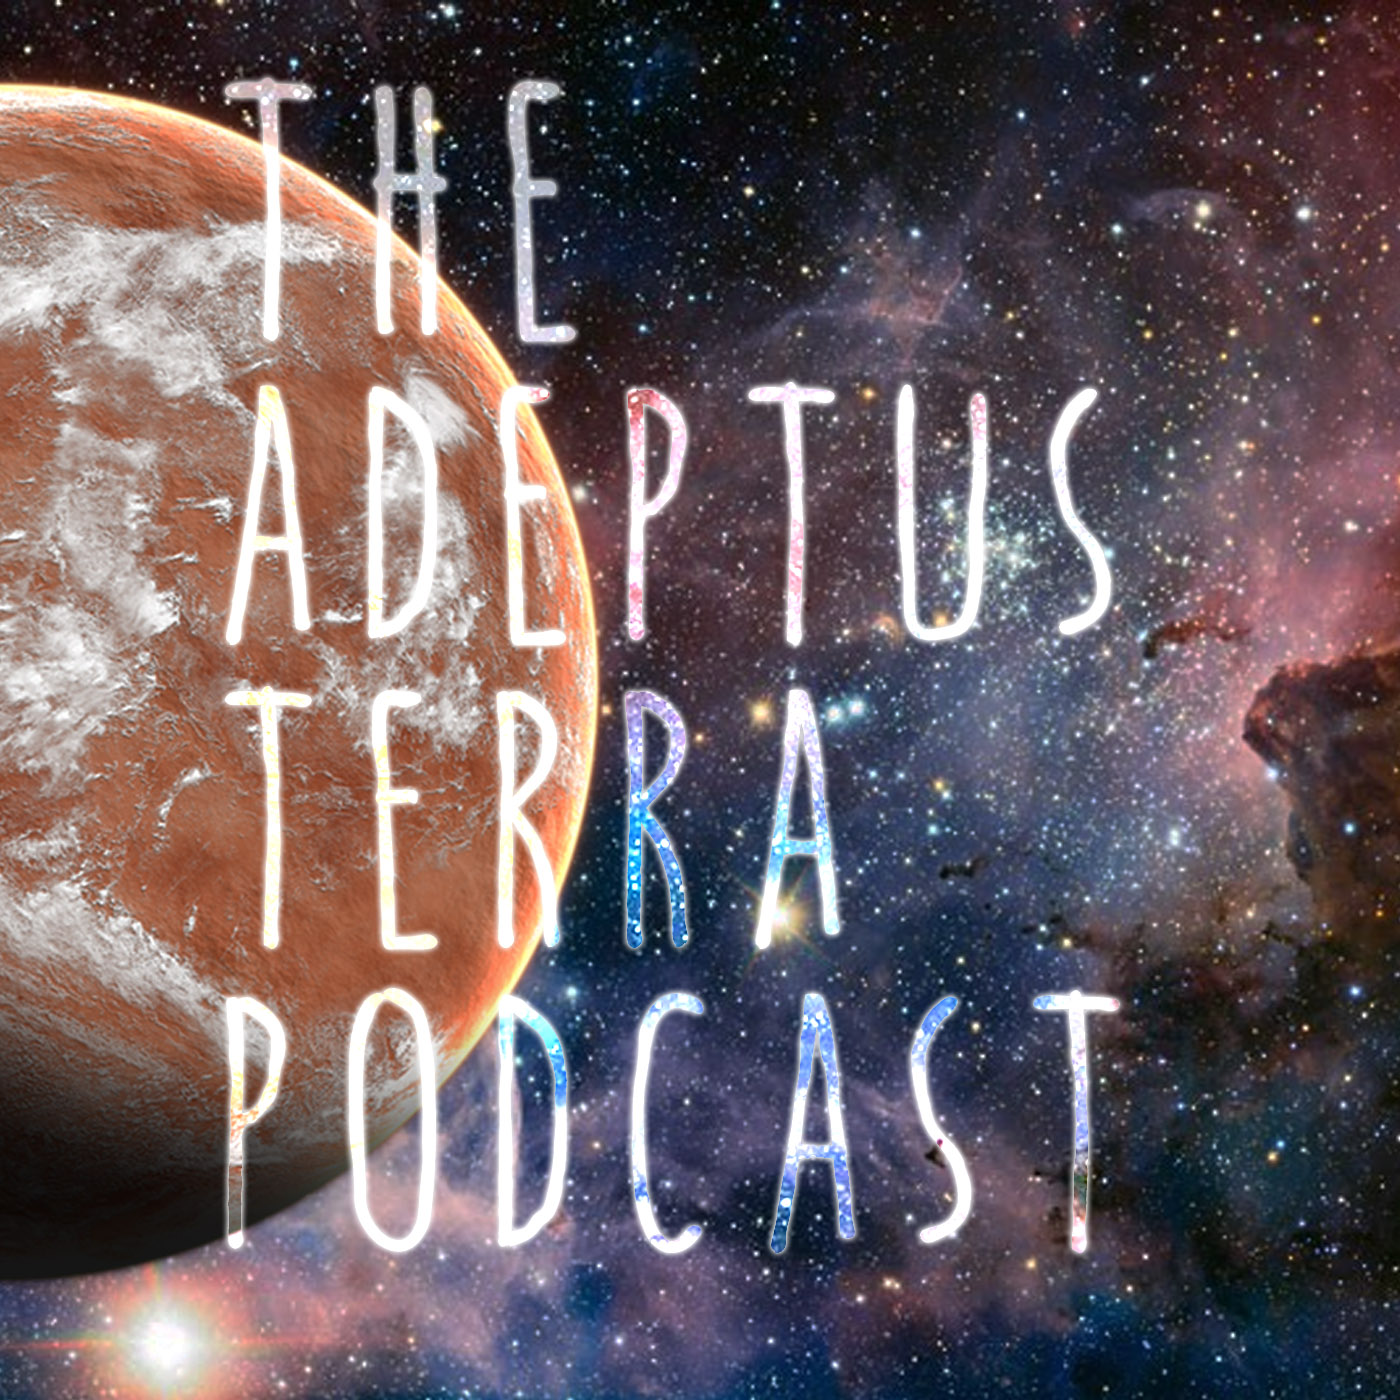 The Adeptus Terra Podcast Episode 30 ’30K all day’